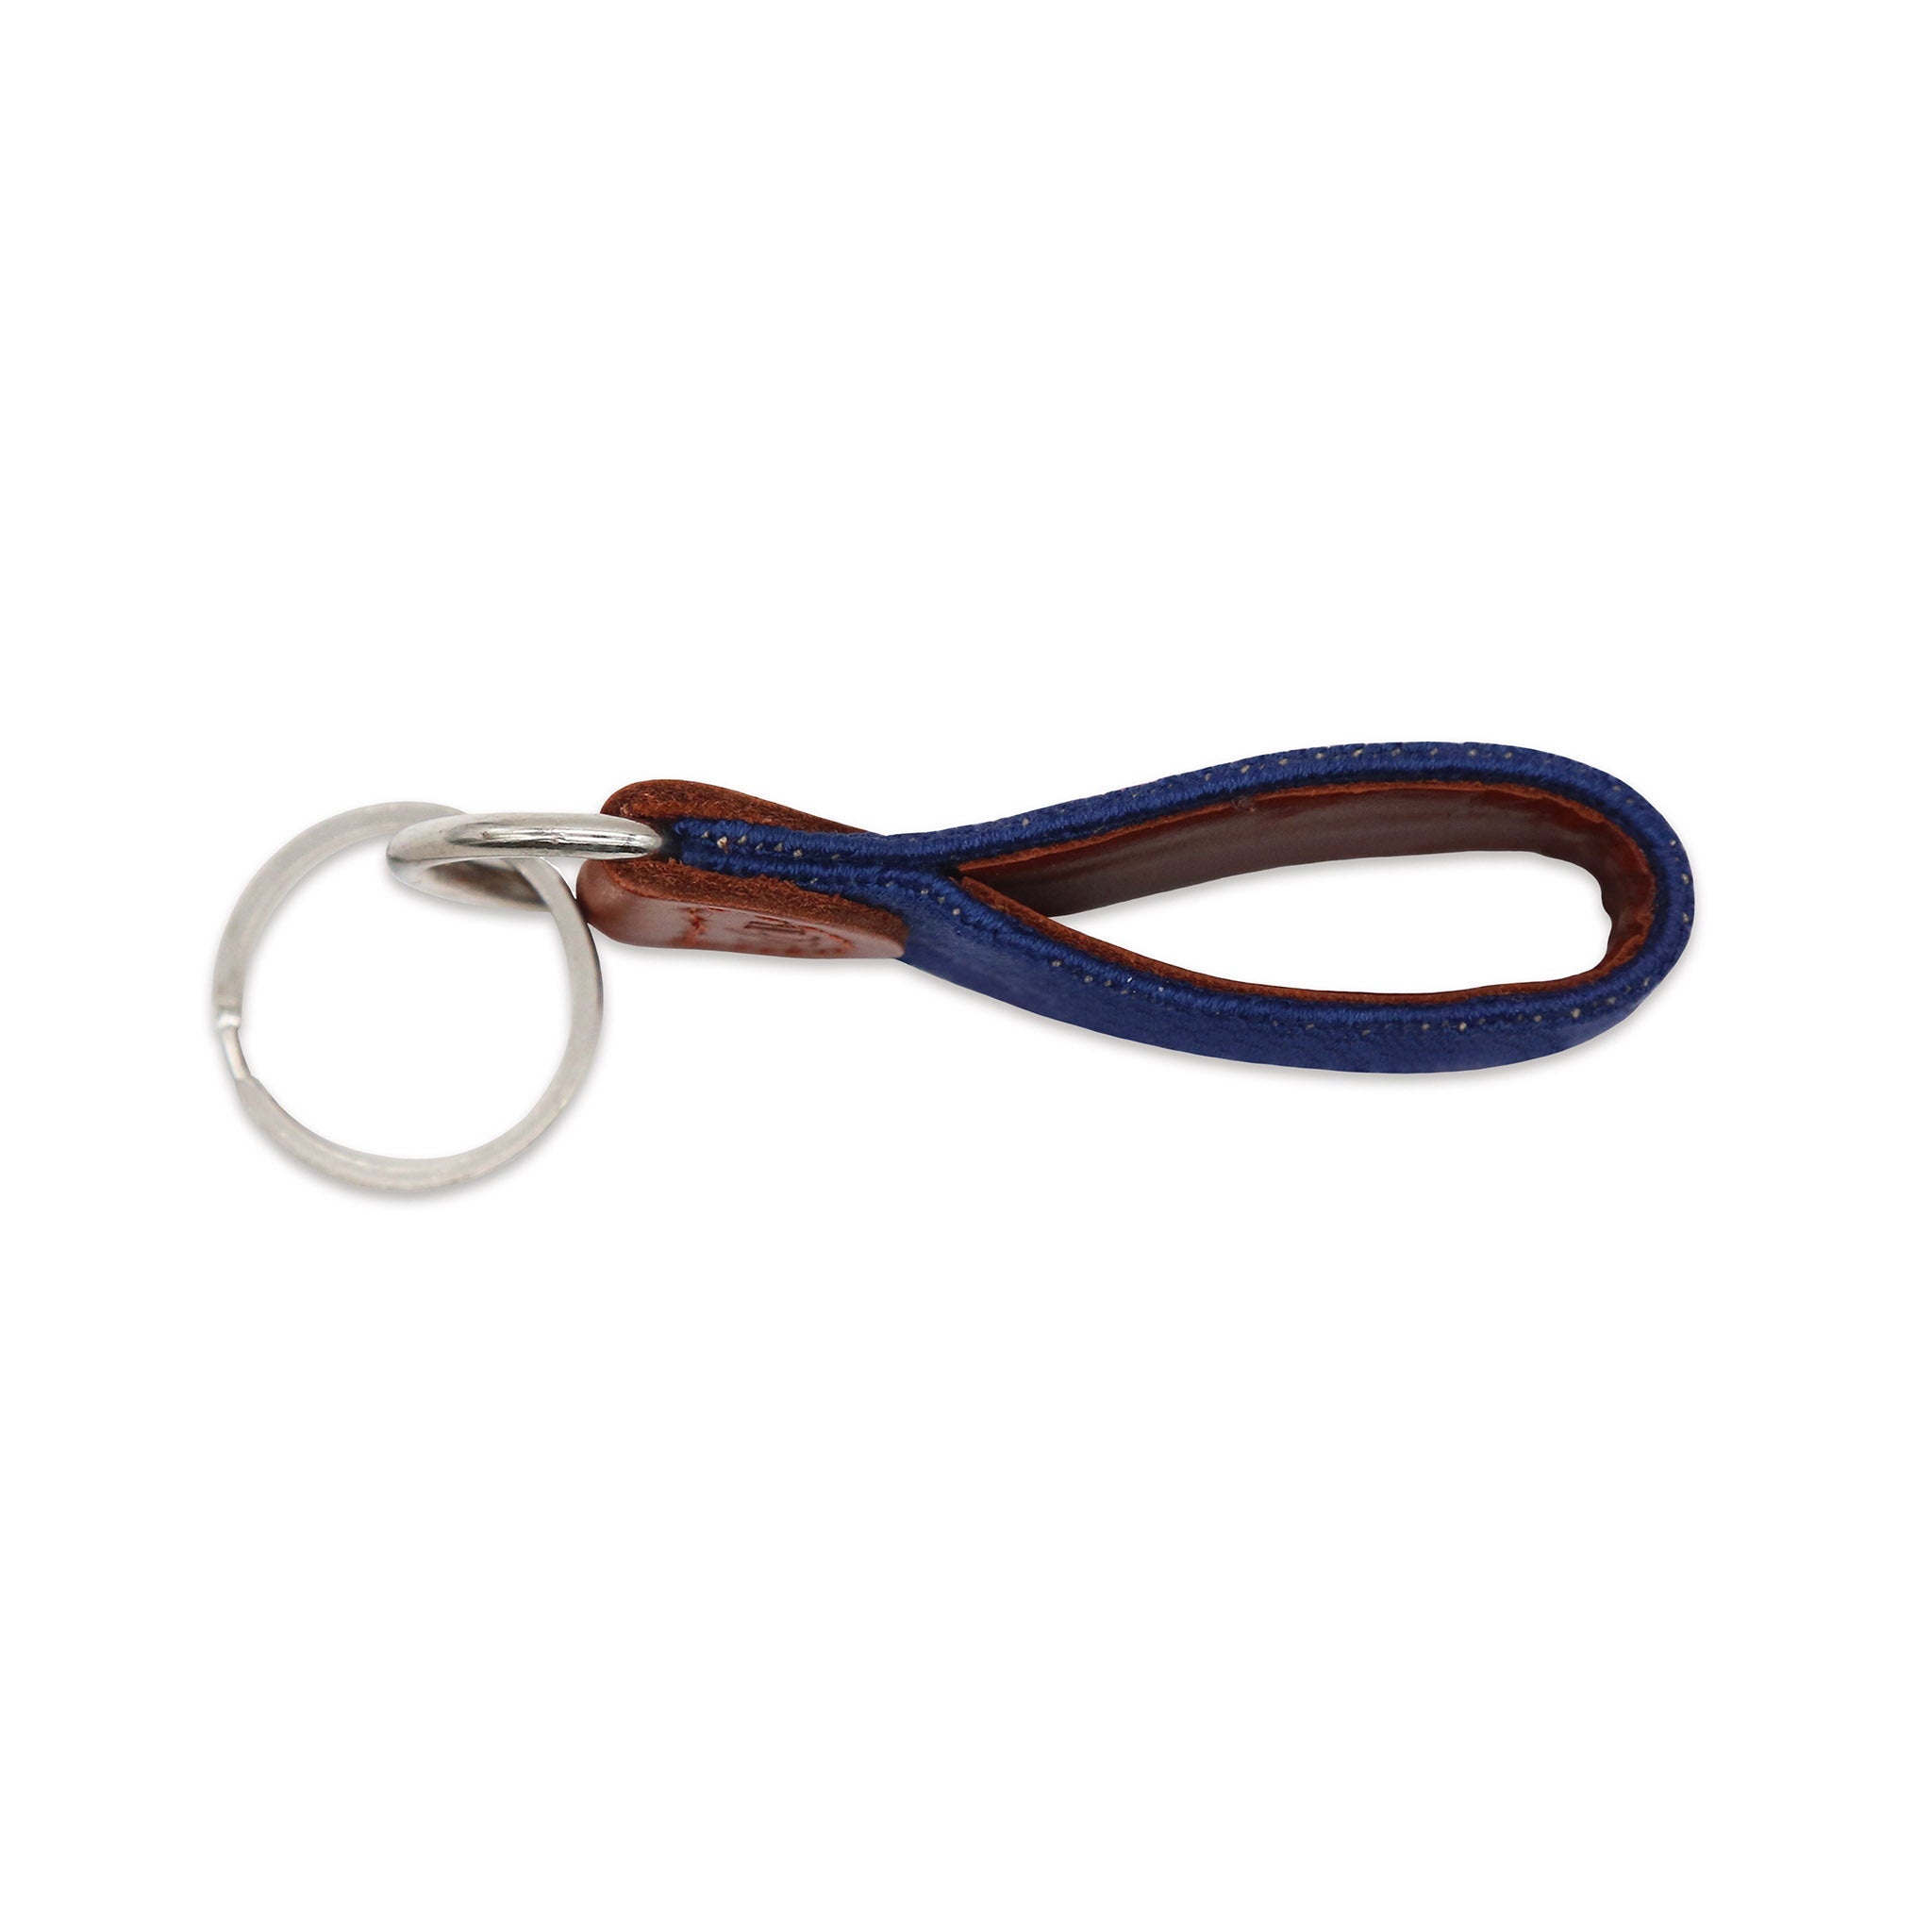 Personalised Key Ring / Key Chain / Running Strap / Bag Tag / Key Wrist  Strap Printed With Name or Message Very Strong Clasp NAVY 